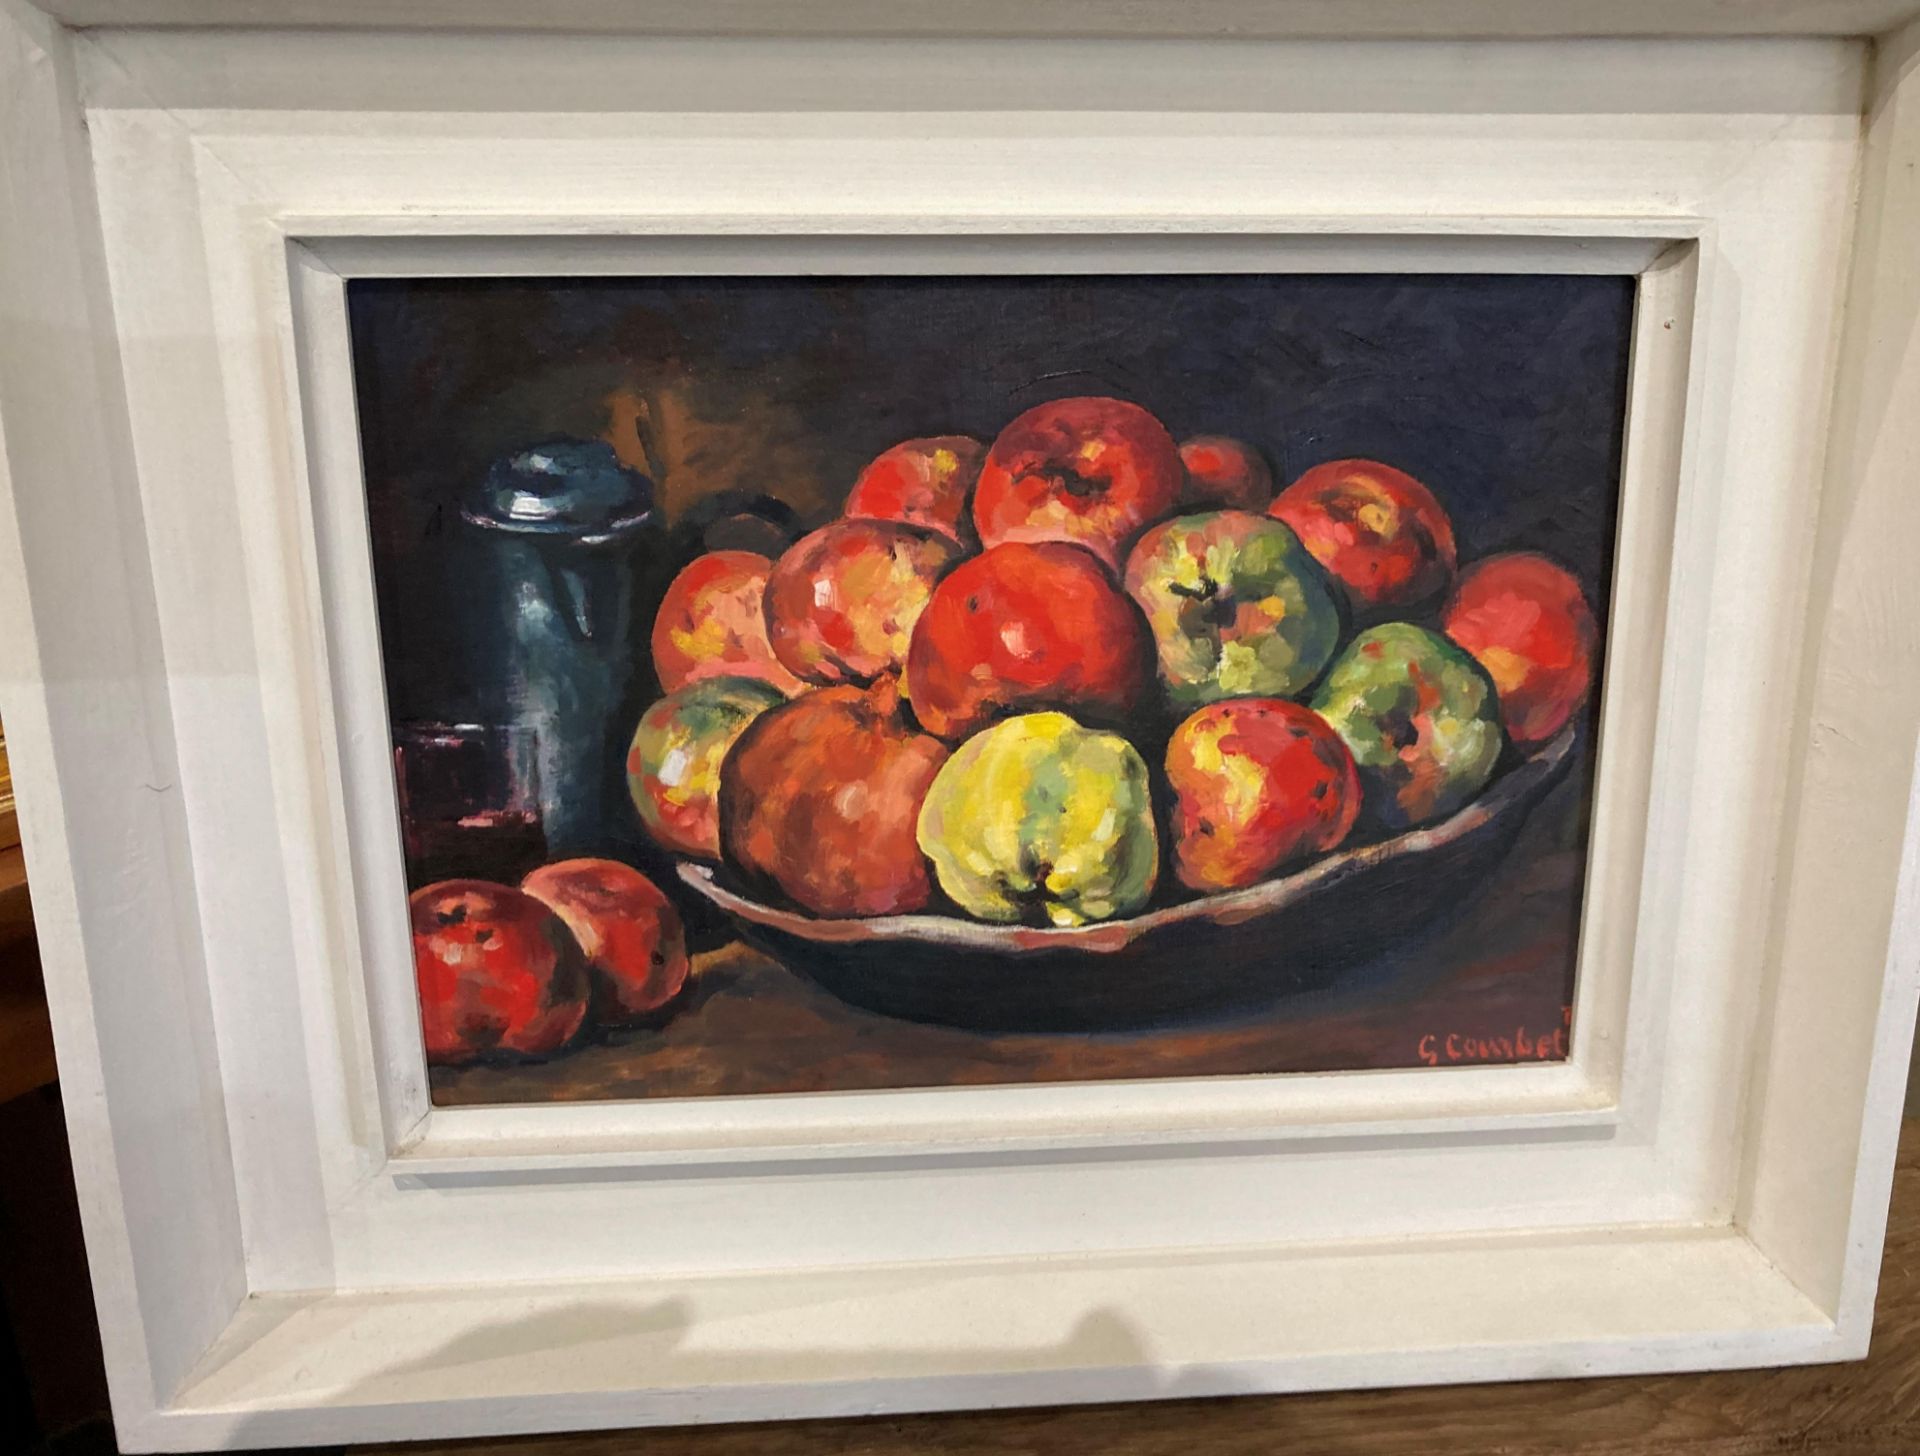 Copy of Gustav Courbet's 'Still Life with Apples and a Pomegranate', framed oil on board,